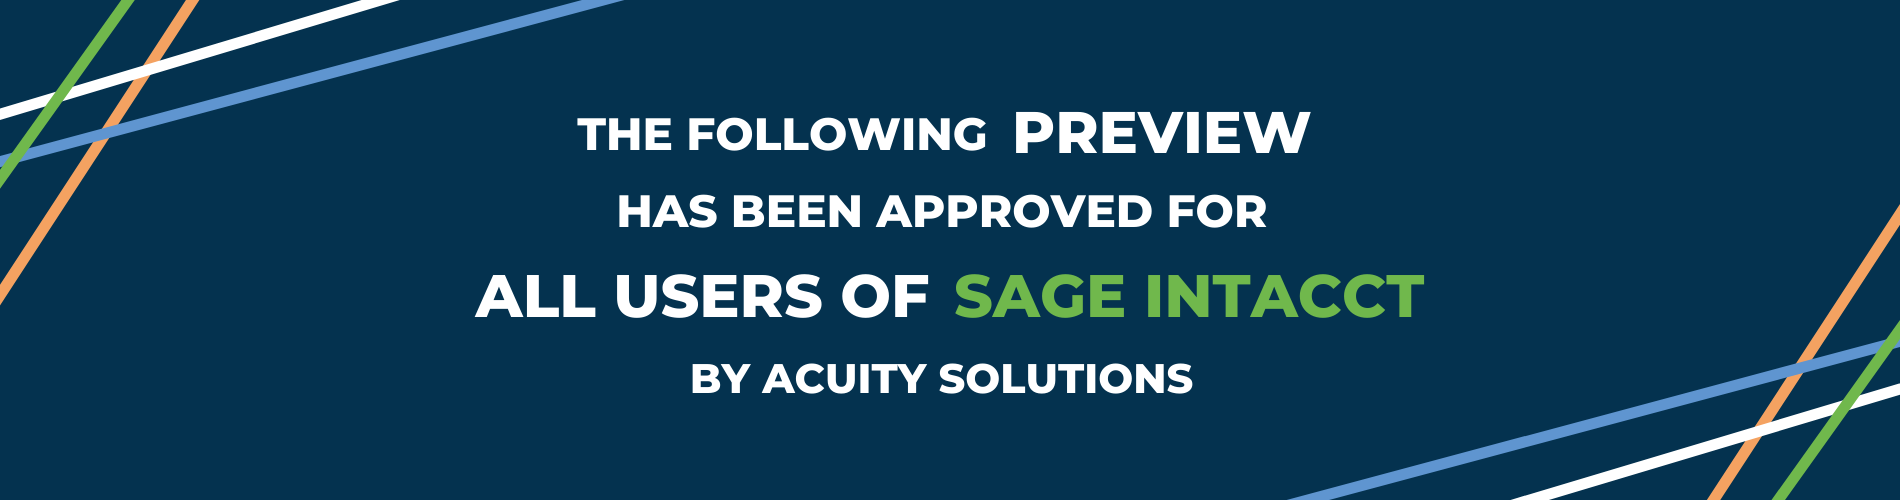 Read the preview for Sage Intacct 2022 Release 1